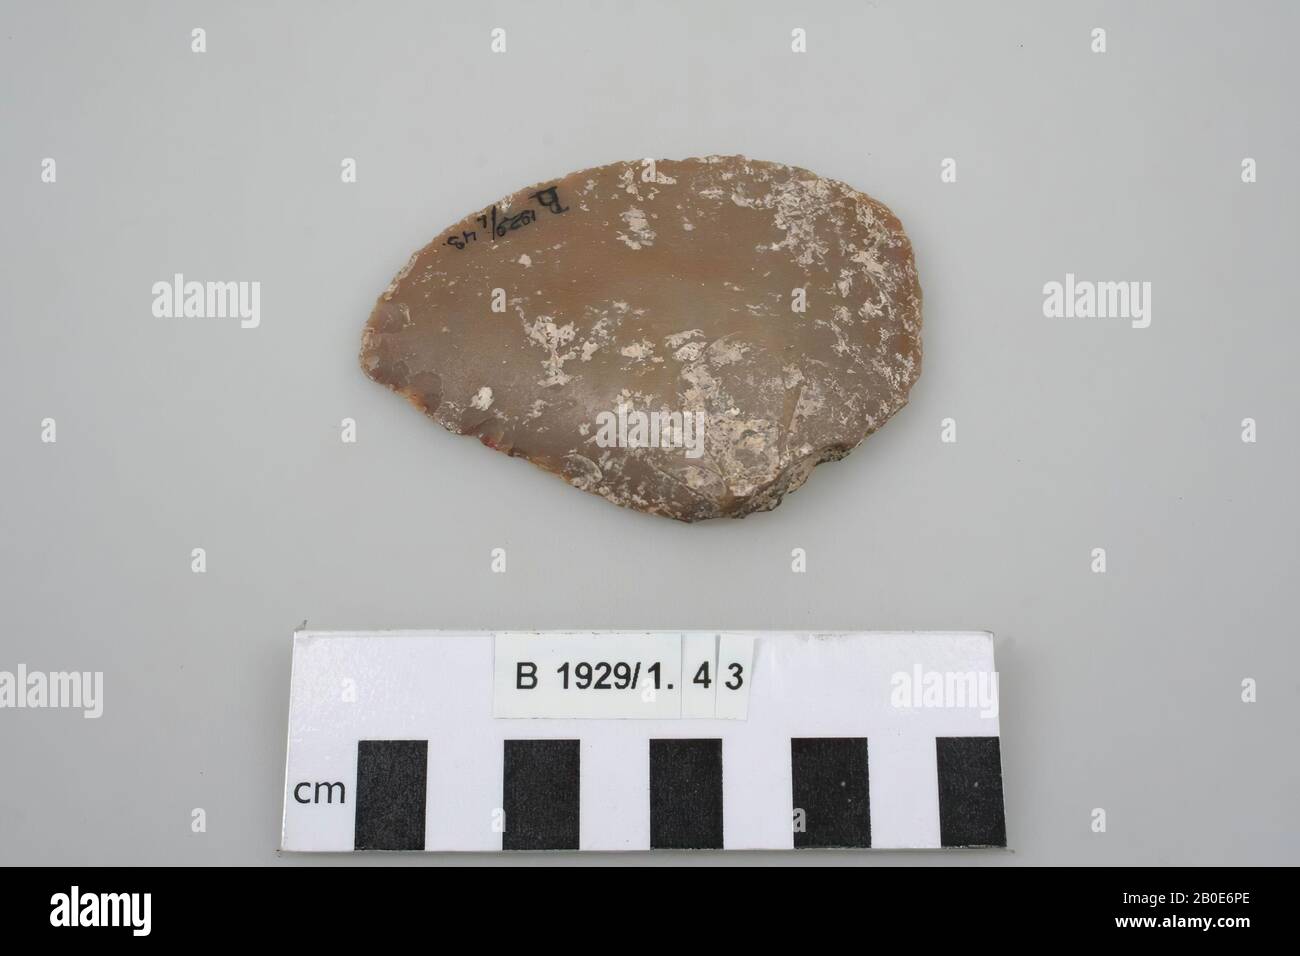 Ancient Near East, tool, stone, flint, L 9 cm, Chalcolithic, Early Bronze Age 4300-2300 BC, Palestine Stock Photo